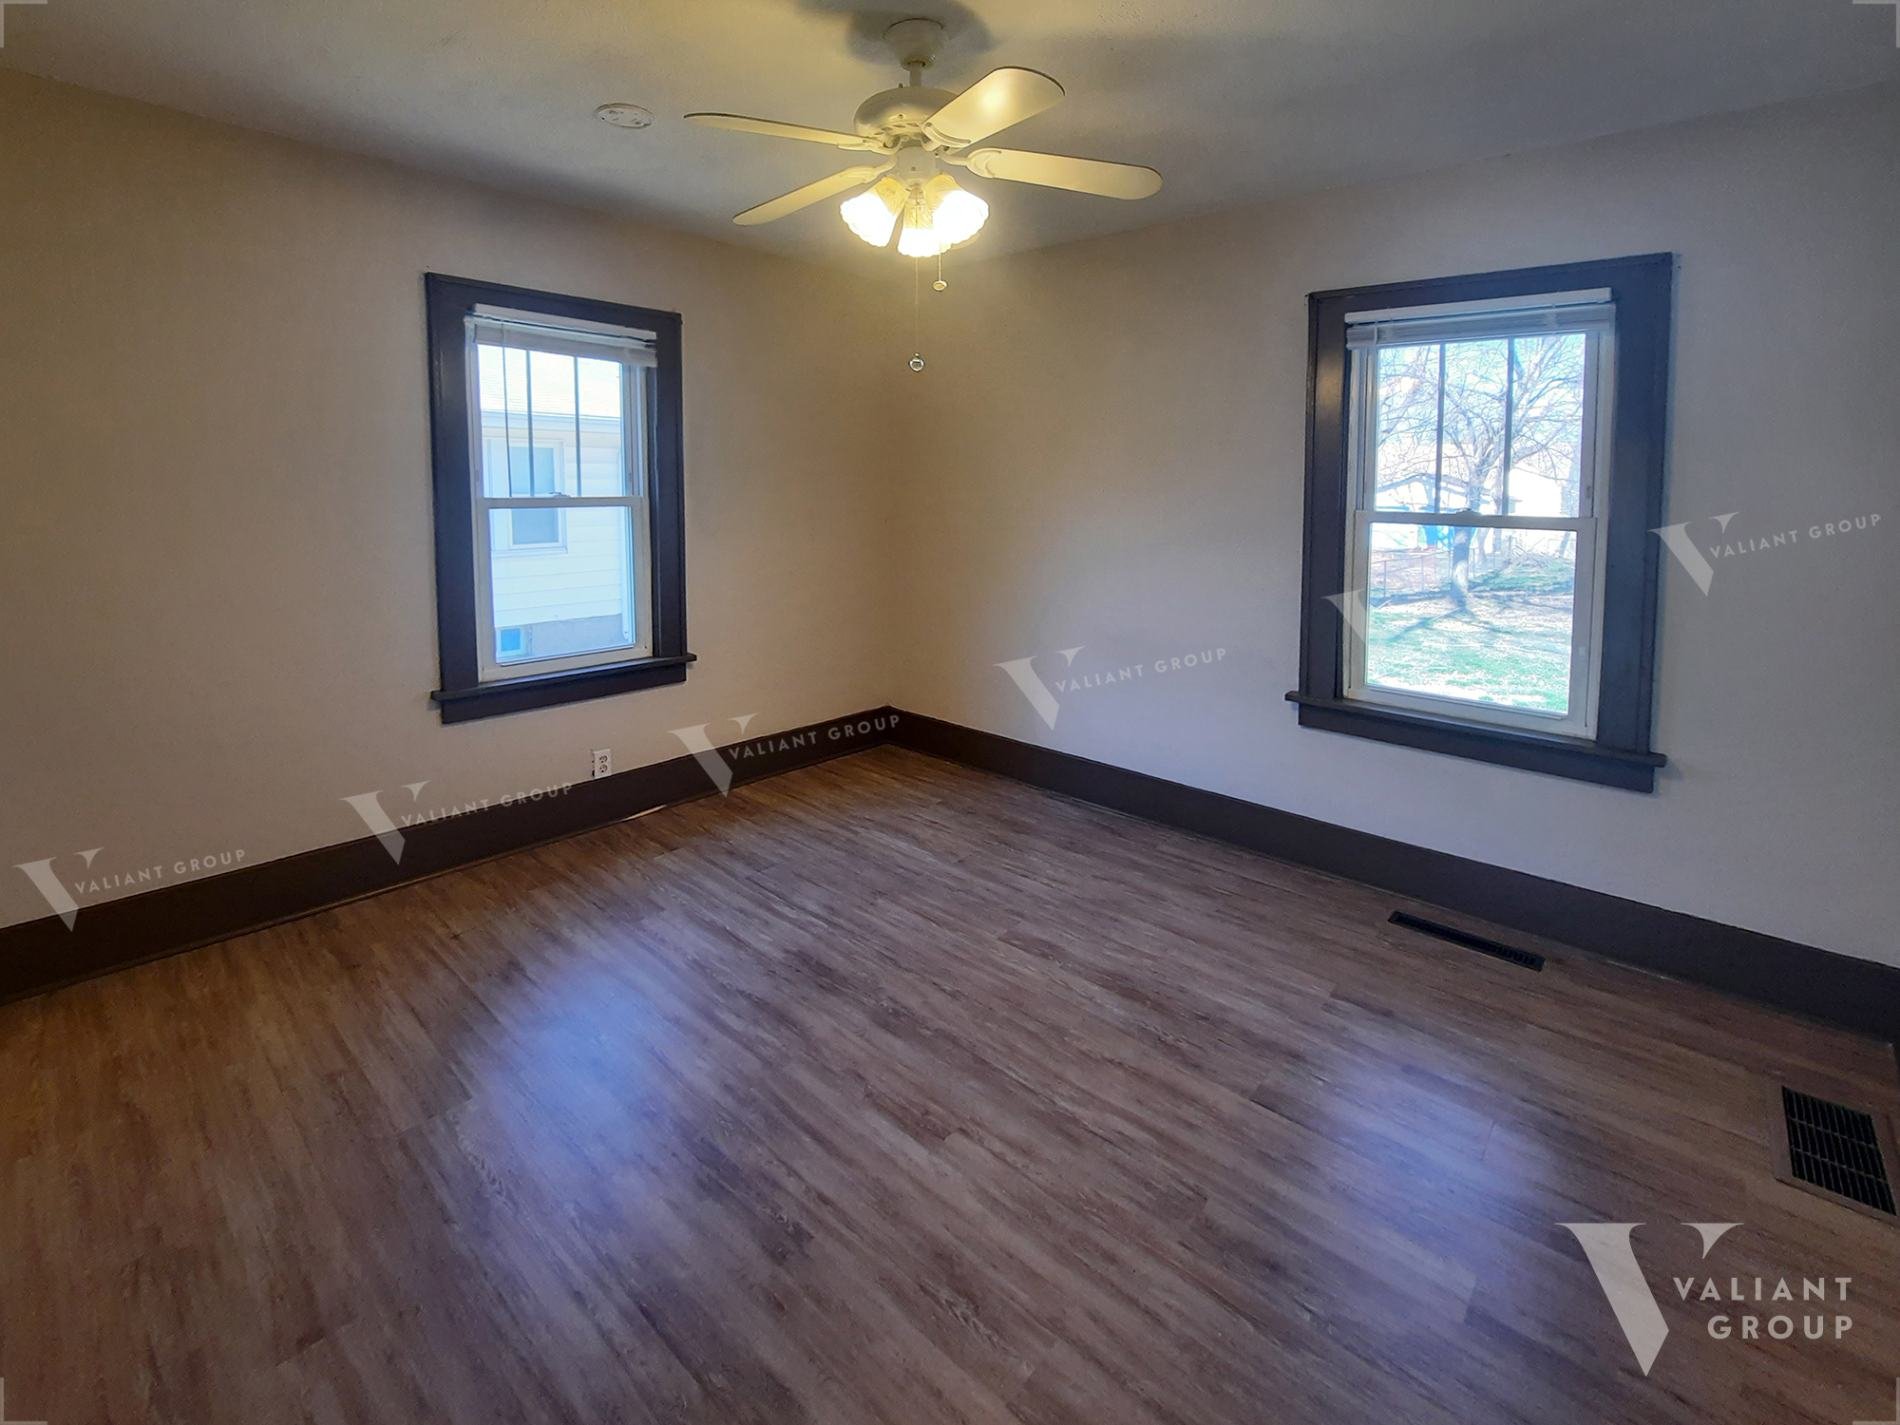 House-for-Rent-2223-W-Elm-St-Springfield-MO-09-Bedroom.jpg